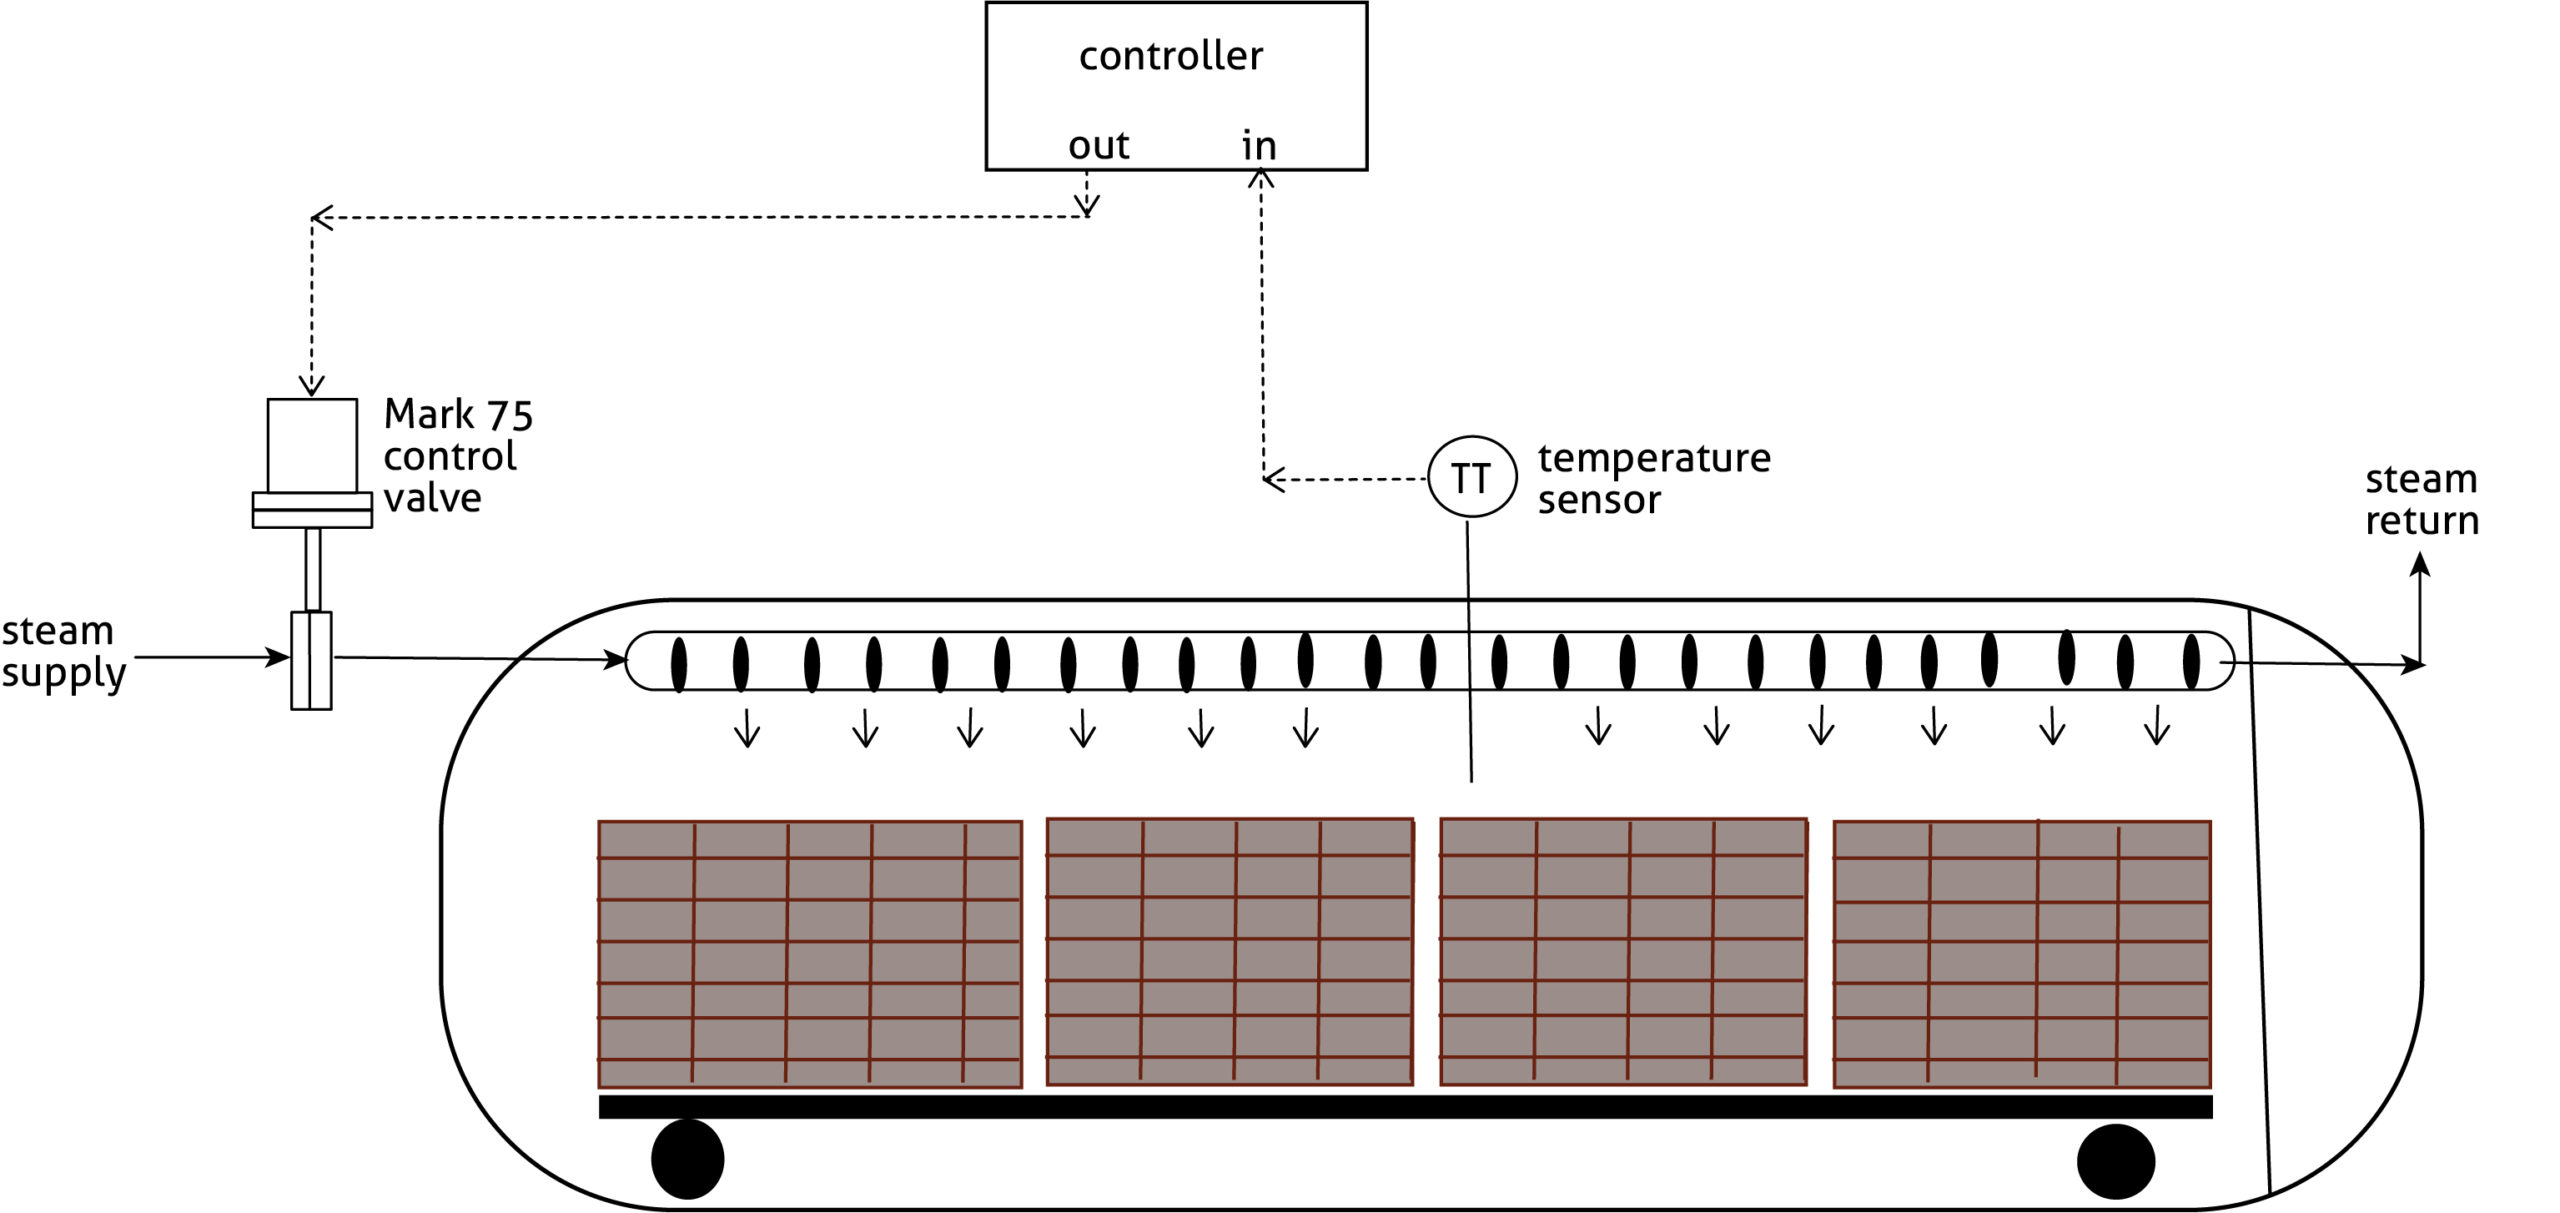 Schematic of Steam Control in an autoclave kiln